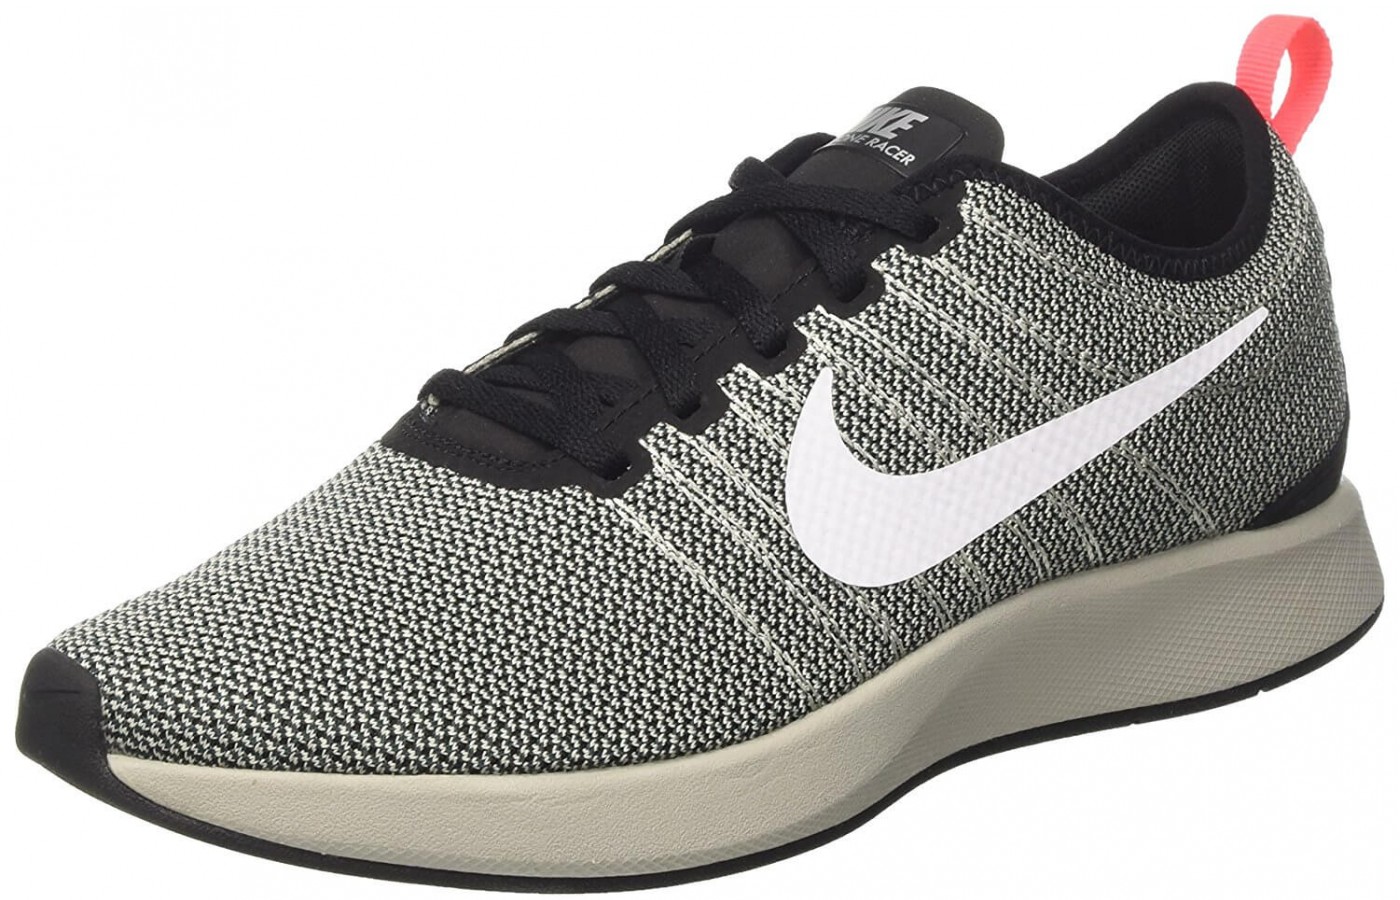 The Nike Dualtone Racer front angled perspective